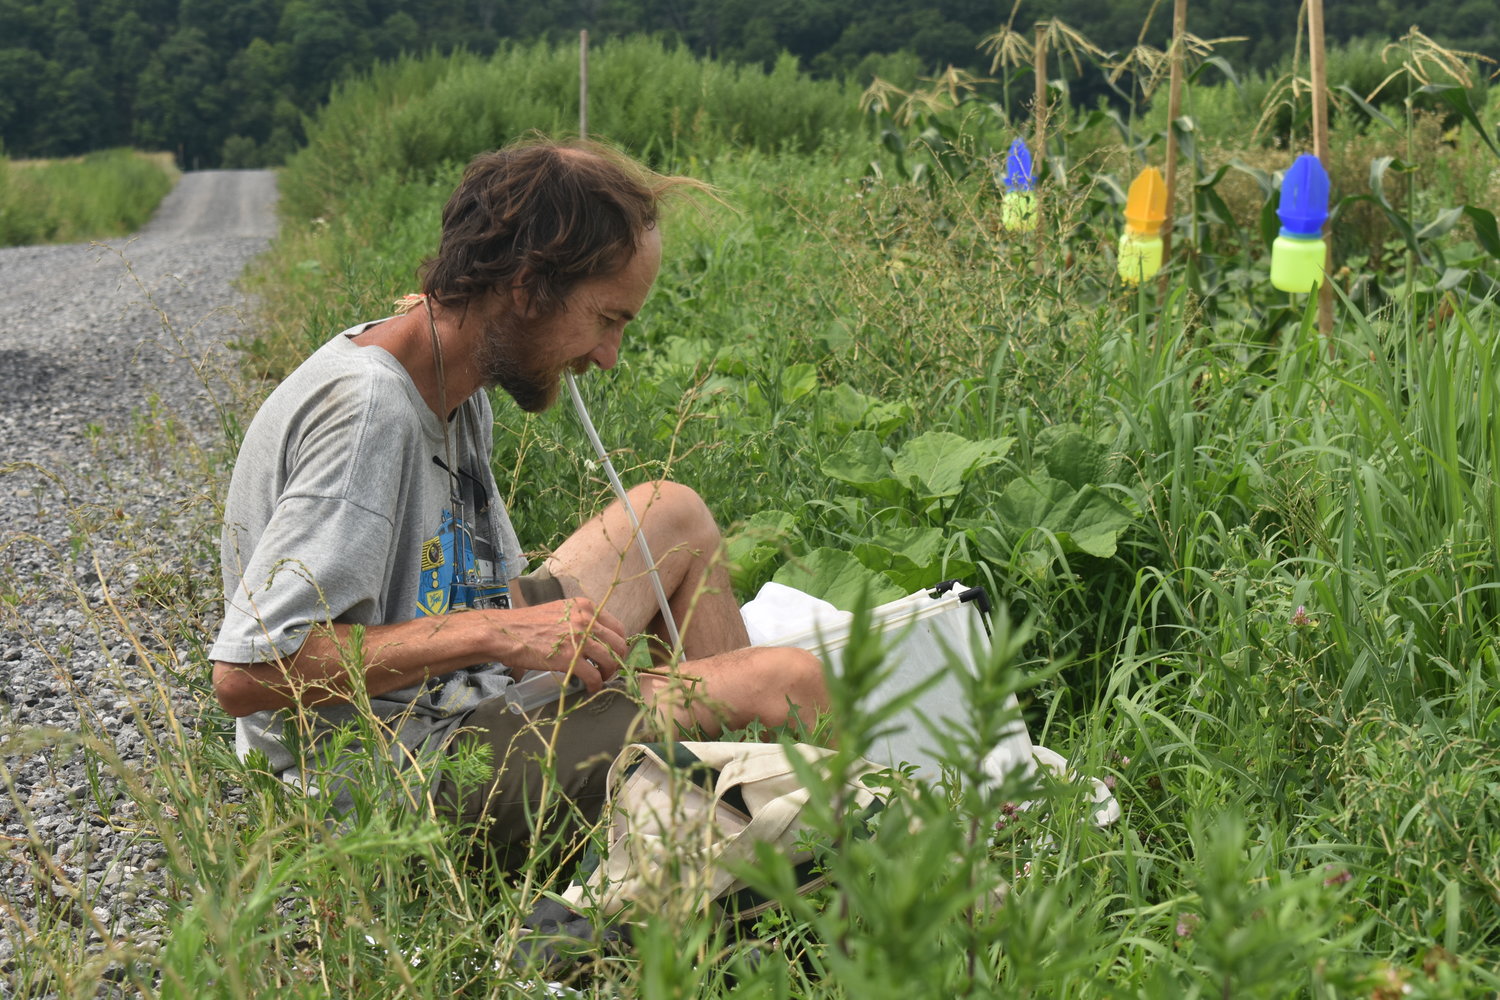 Conrad Vispo of Hawthorne Valley is the lead researcher for the Native Meadow Trial at the Hudson Valley Farm Hub in September 2021.